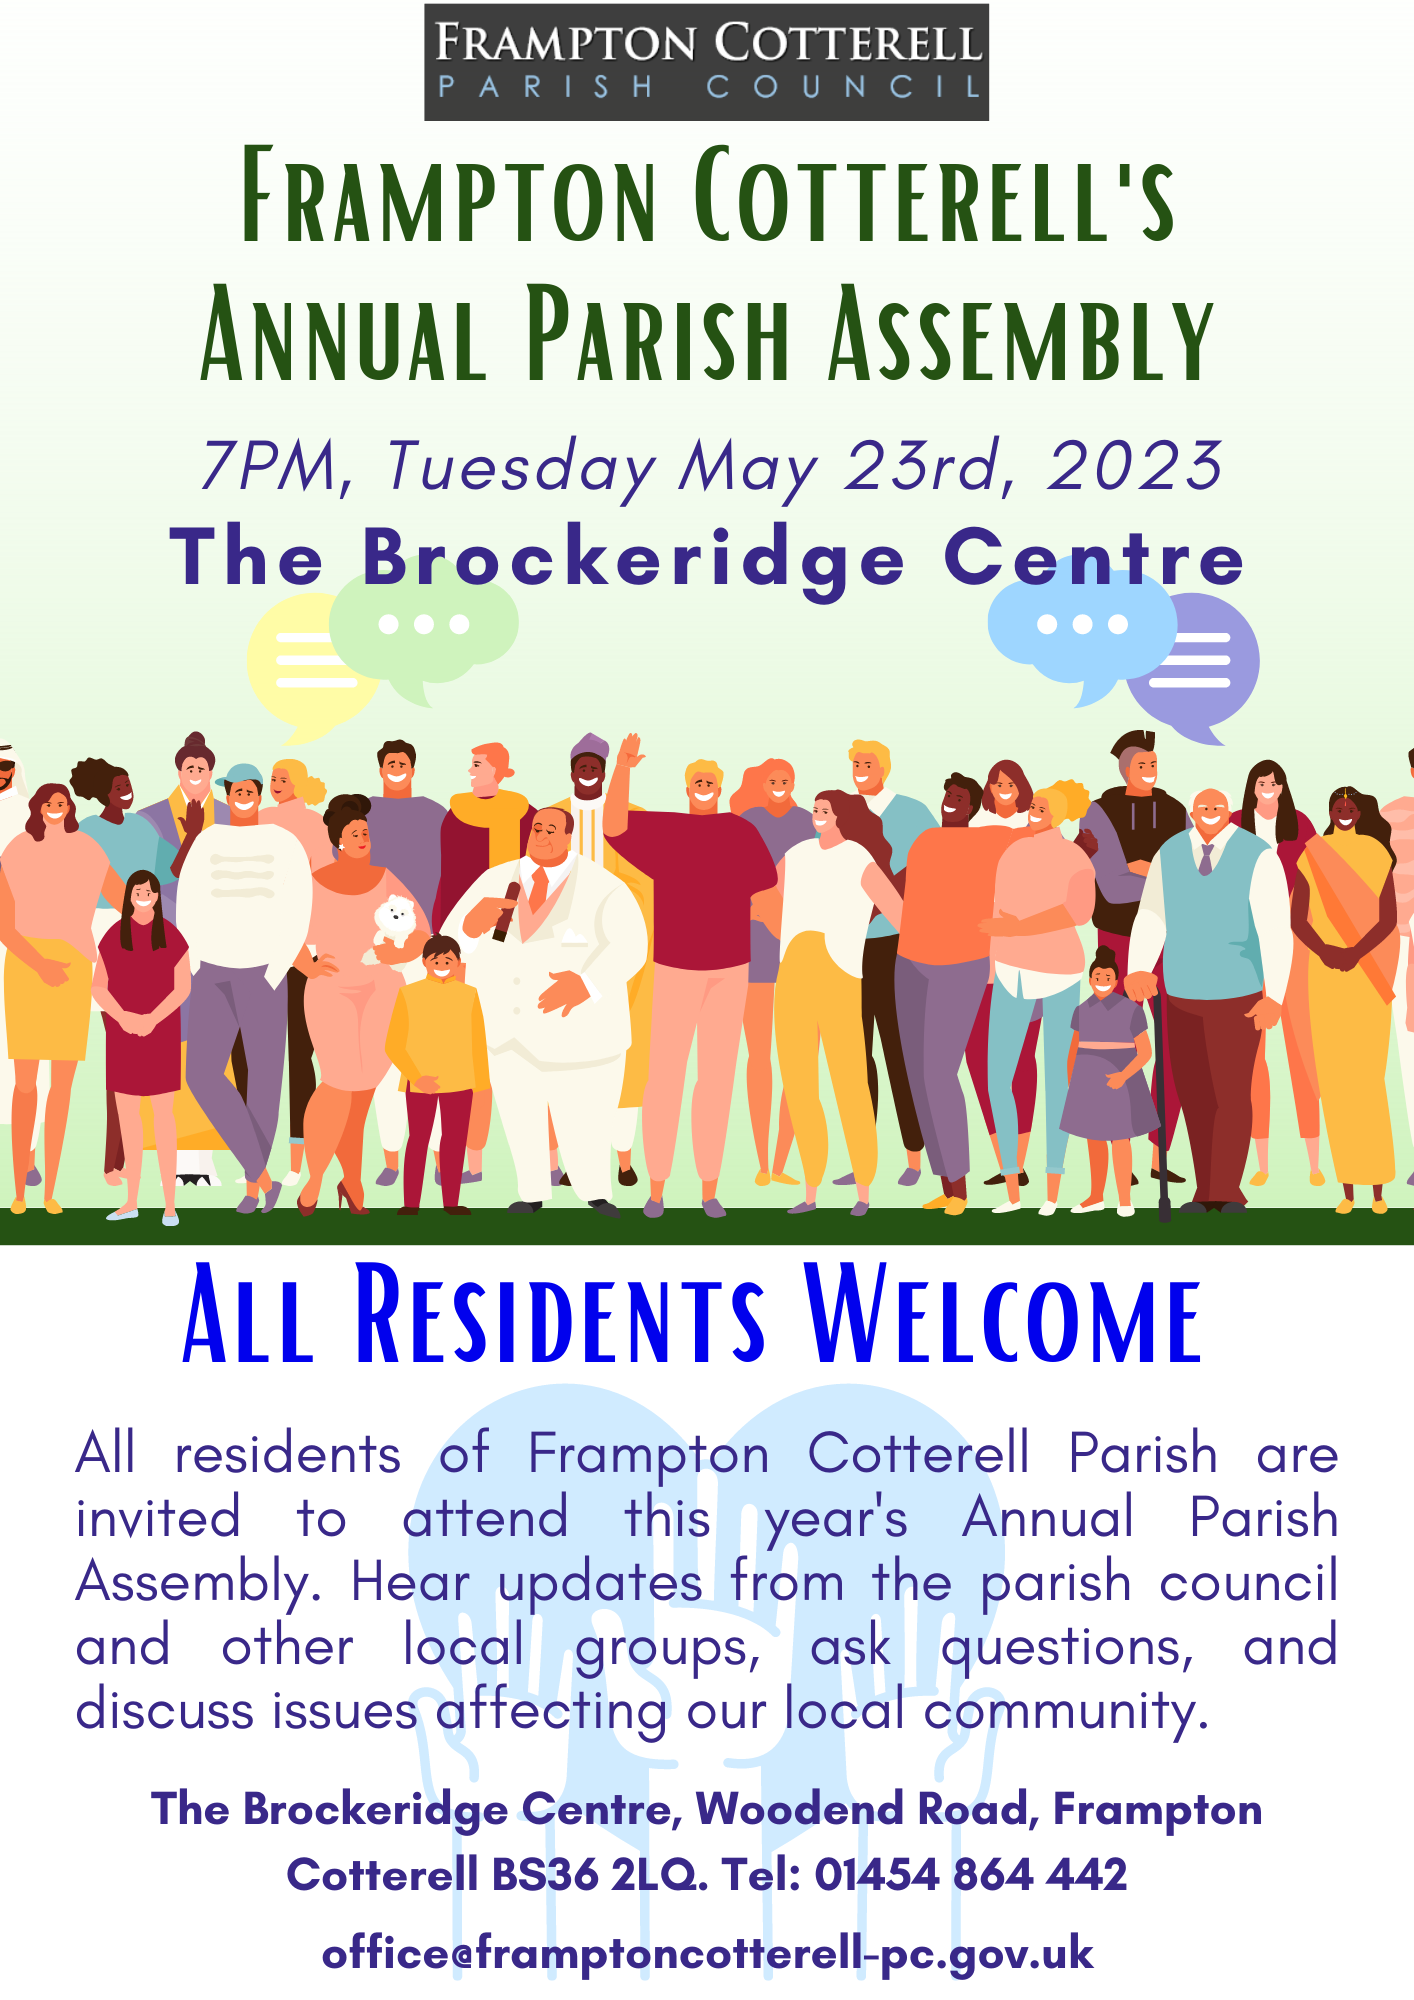 Frampton Cotterell Parish Council. Frampton Cotterell's Annual Parish Assembly / 7PM, Tuesday May 23rd, 2023 / The Brockeridge Centre / All Residents Welcome / All residents of Frampton Cotterell Parish are invited to attend this year's Annual Parish Assembly. Hear updates from the parish council and other local groups, ask questions, and discuss issues affecting our local community. / The Brockeridge Centre, Woodend Road, Frampton Cotterell BS36 2LQ. Tel: 01454 864 442 office@framptoncotterell-pc.gov.uk